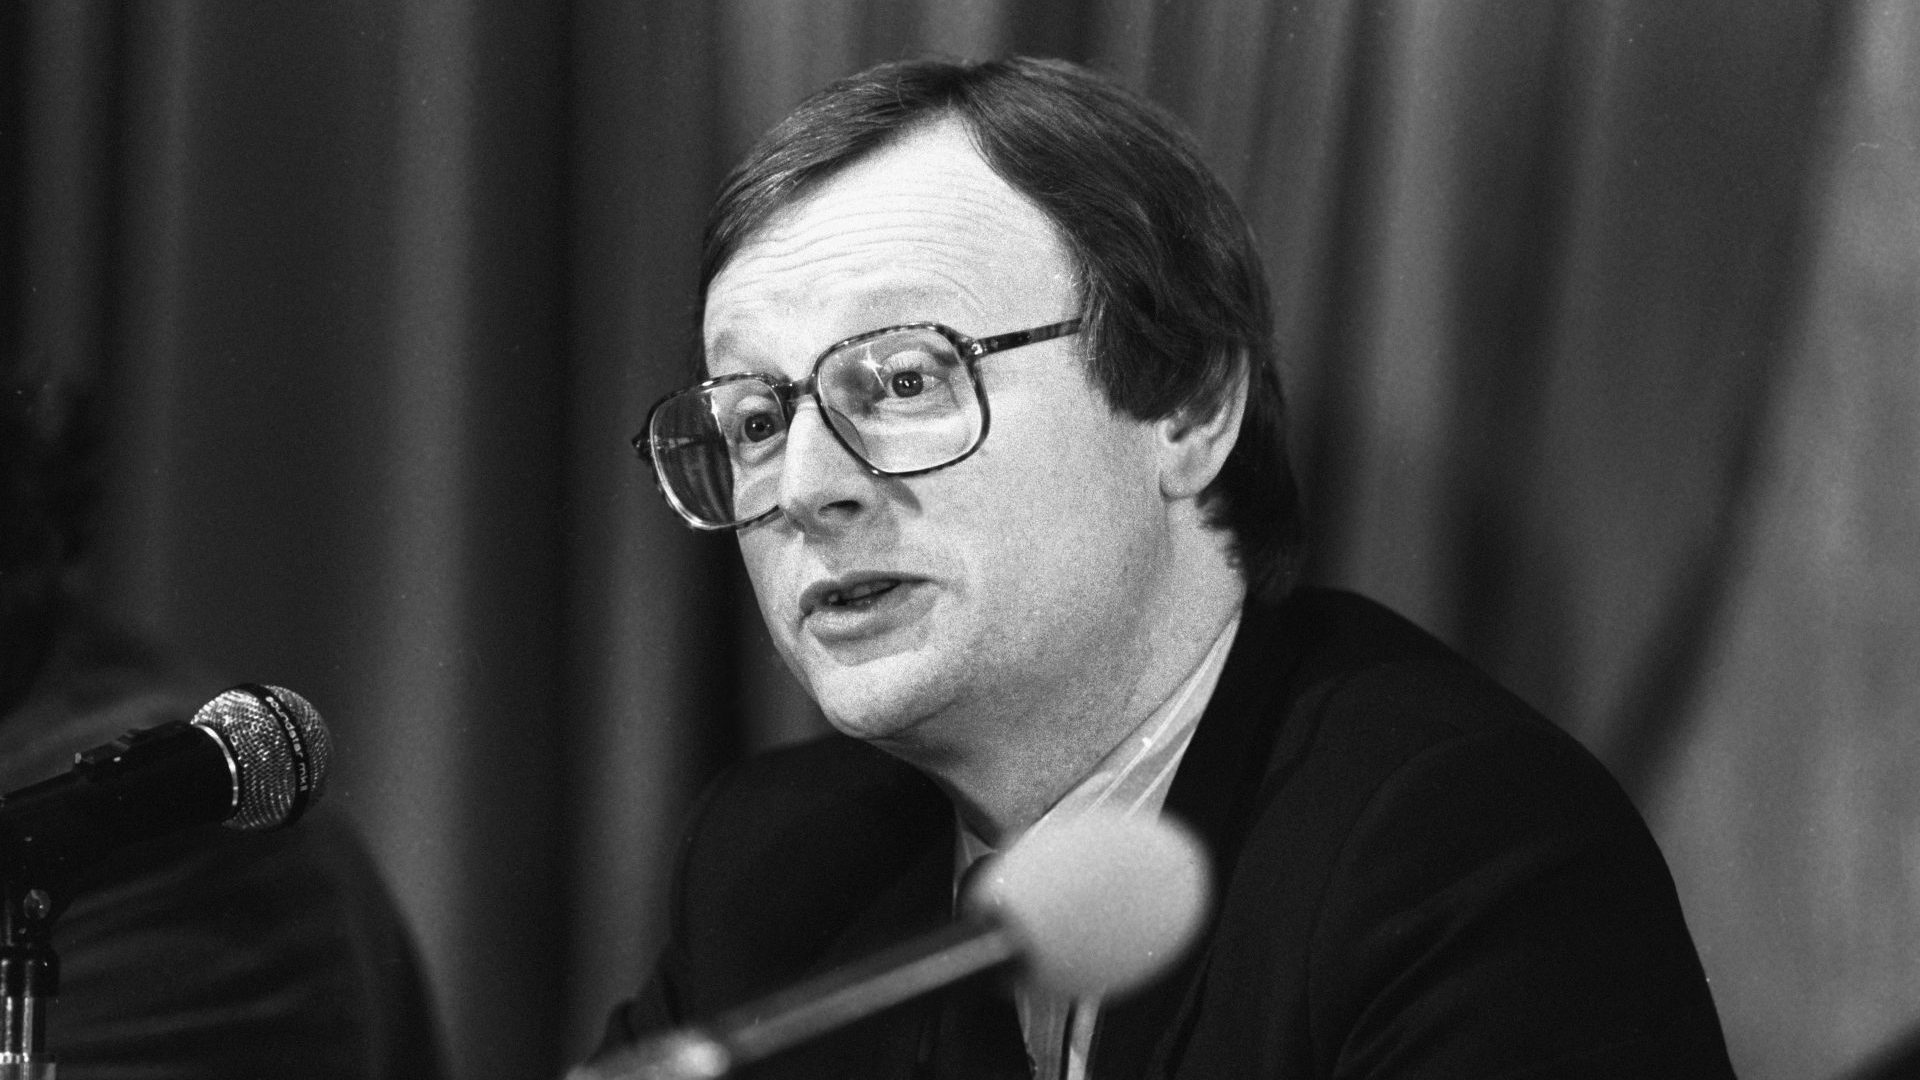 Then chairman of the Conservative party John Selwyn Gummer talks to the media on November 15, 1984 (Photo by John Downing/Express/Getty Images)